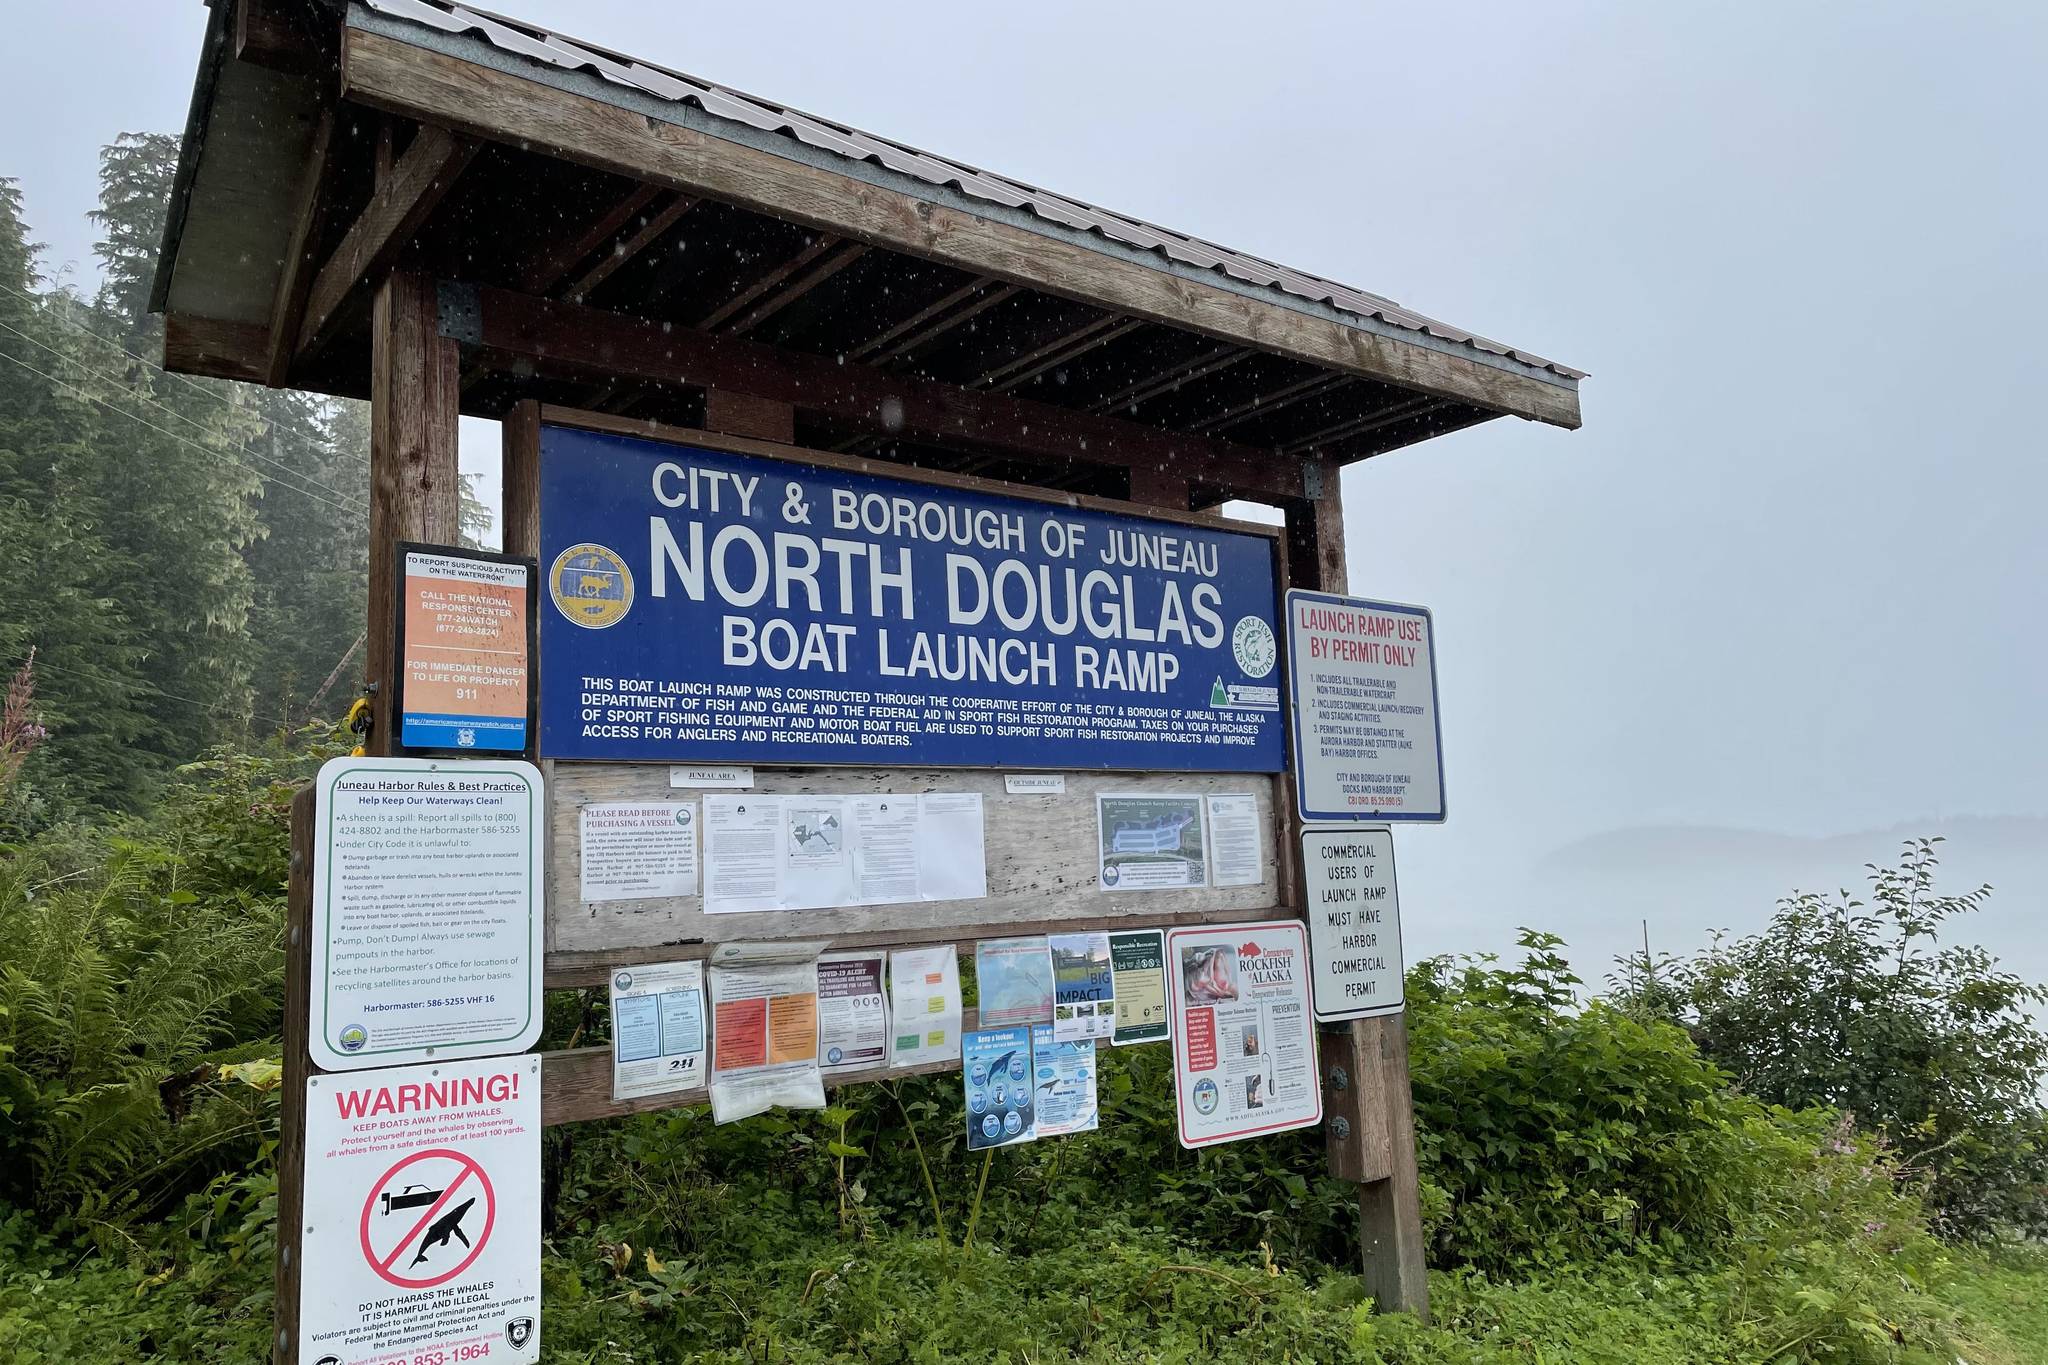 The City and Borough of Juneau's Docks and Harbors department has issued a public survey as they consider improvements to the North Douglas Boat Launch Ramp, seen here on Aug. 18, 2021. (Michael S. Lockett / Juneau Empire)